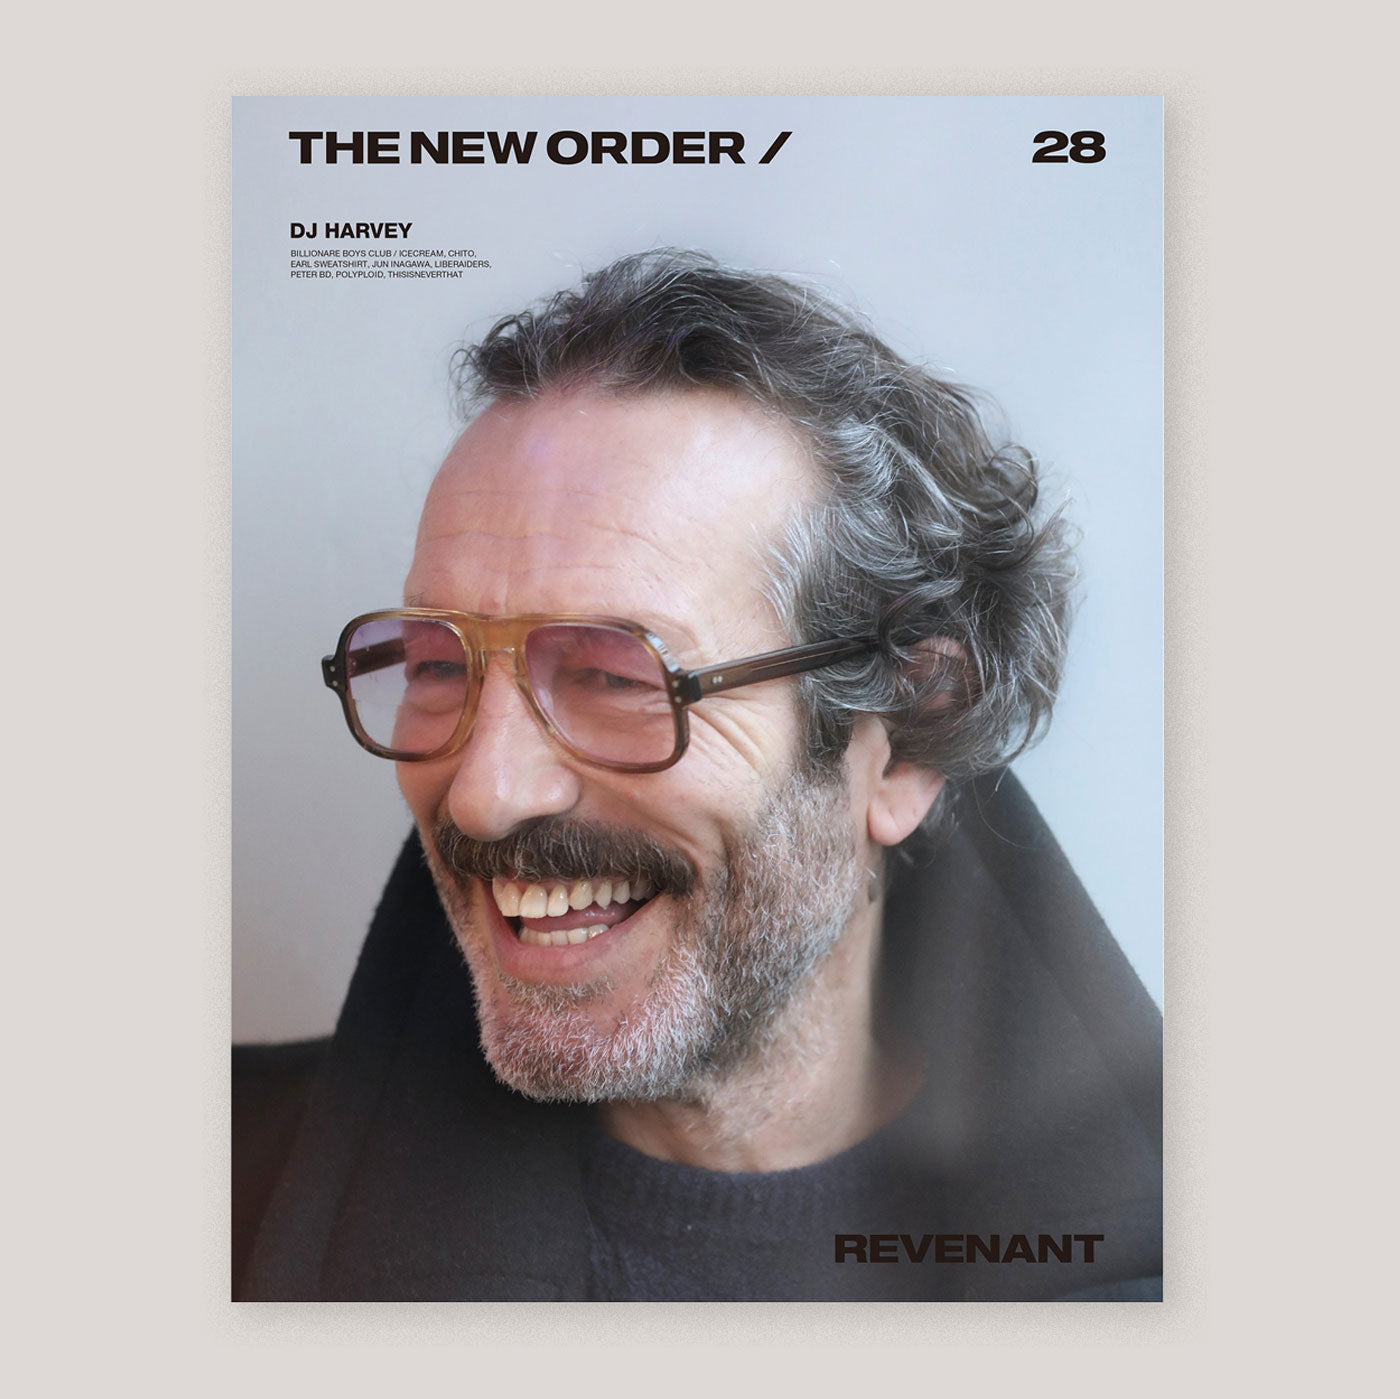 The New Order #28